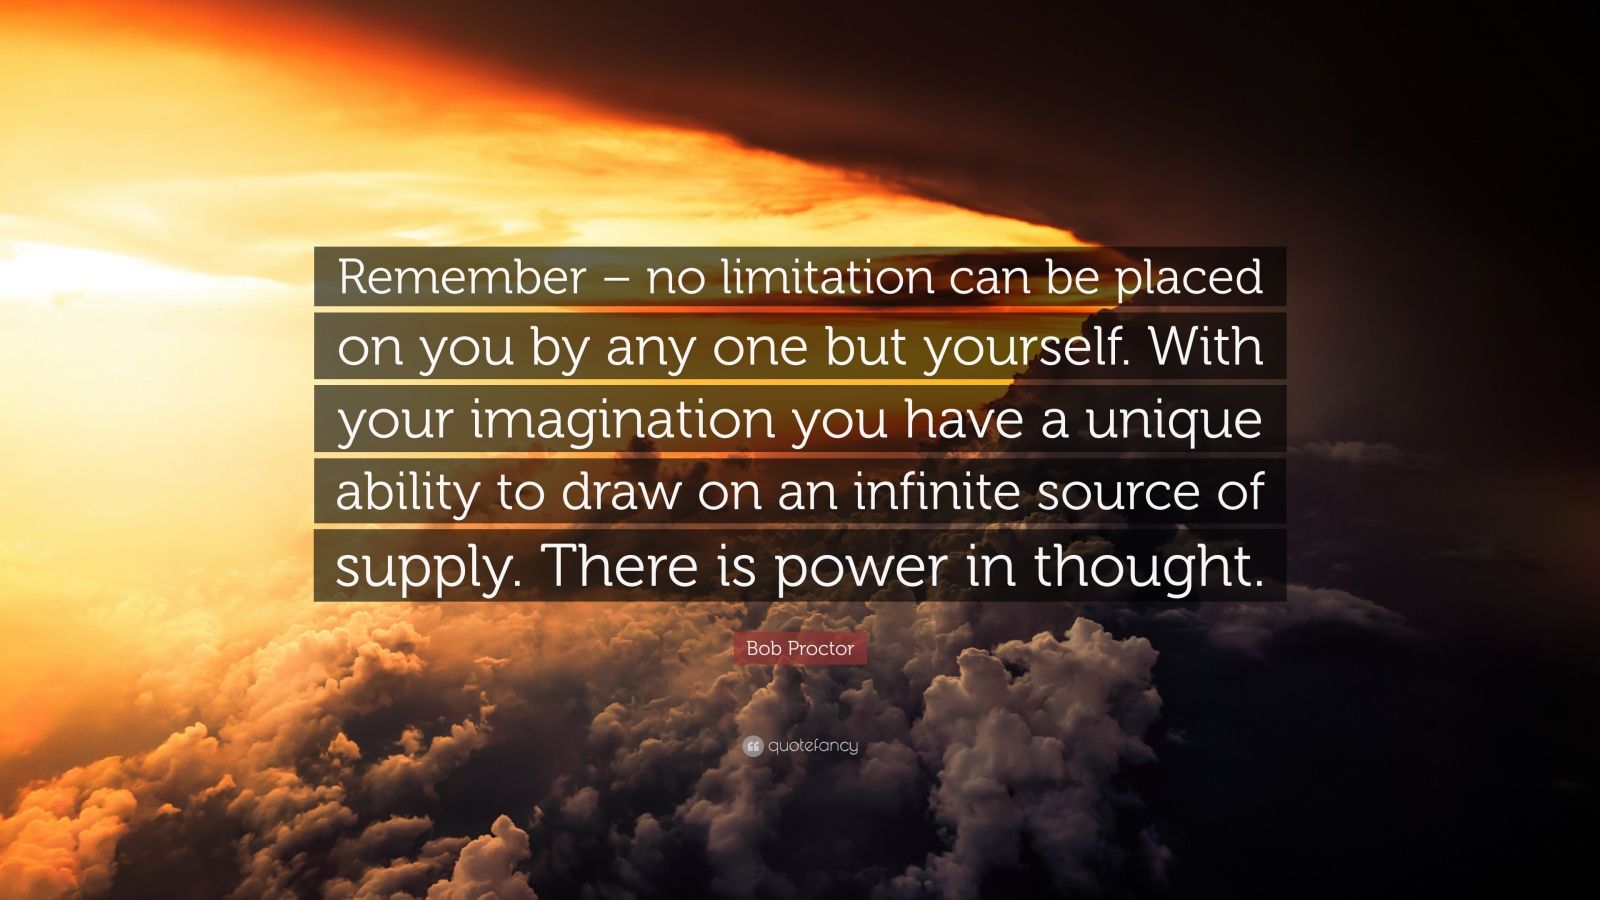 Bob Proctor Quote: “Remember – no limitation can be placed on you by any  one but yourself. With your imagination you have a unique ability t”